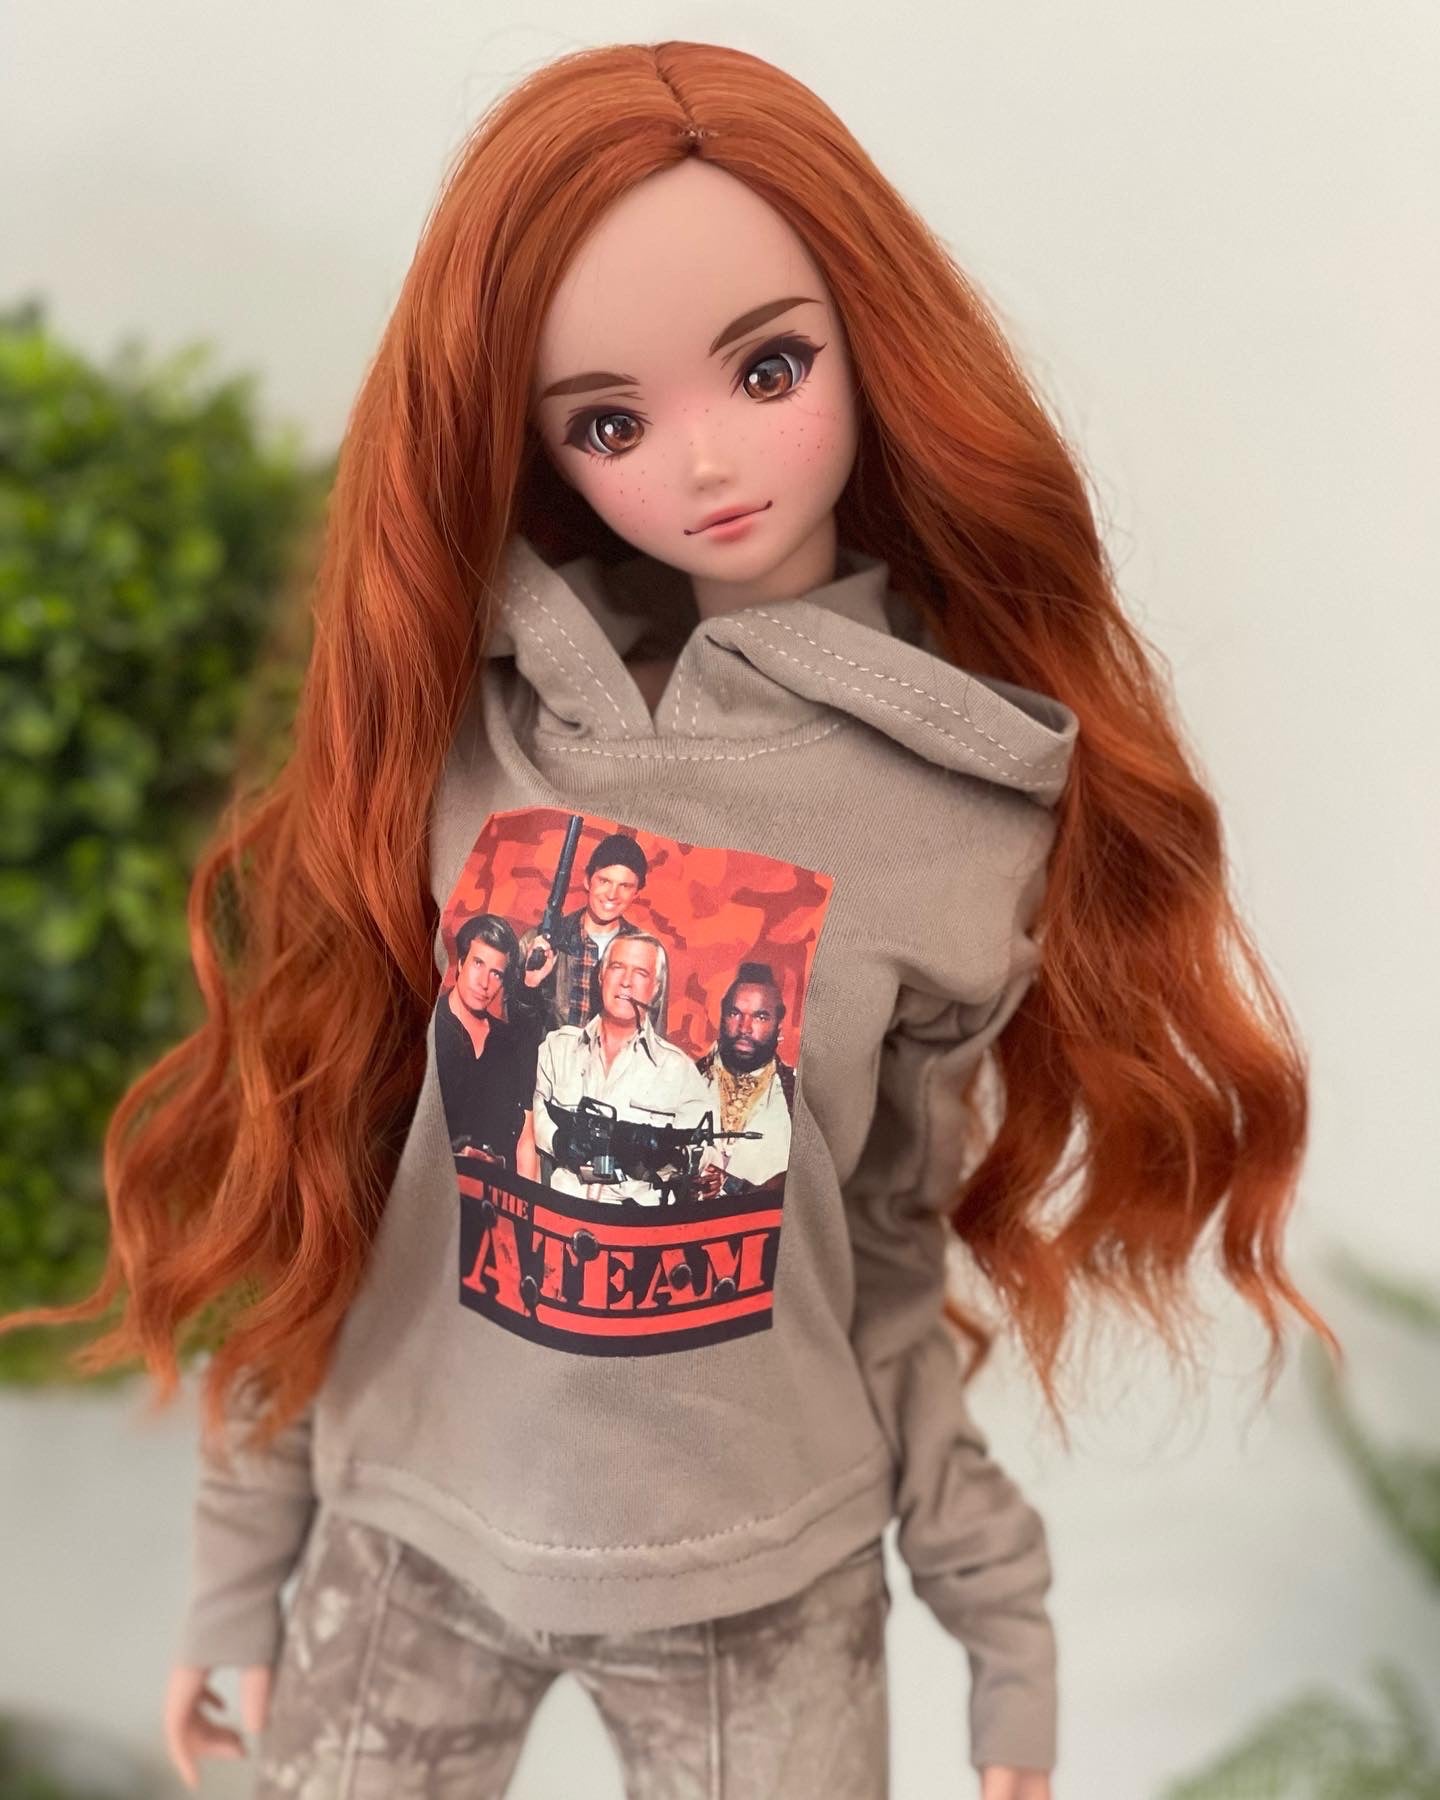 1/3 BJD Smart doll clothes Long Sleeve hoodie Fit BJD, Smart Dolls and similar Unisex